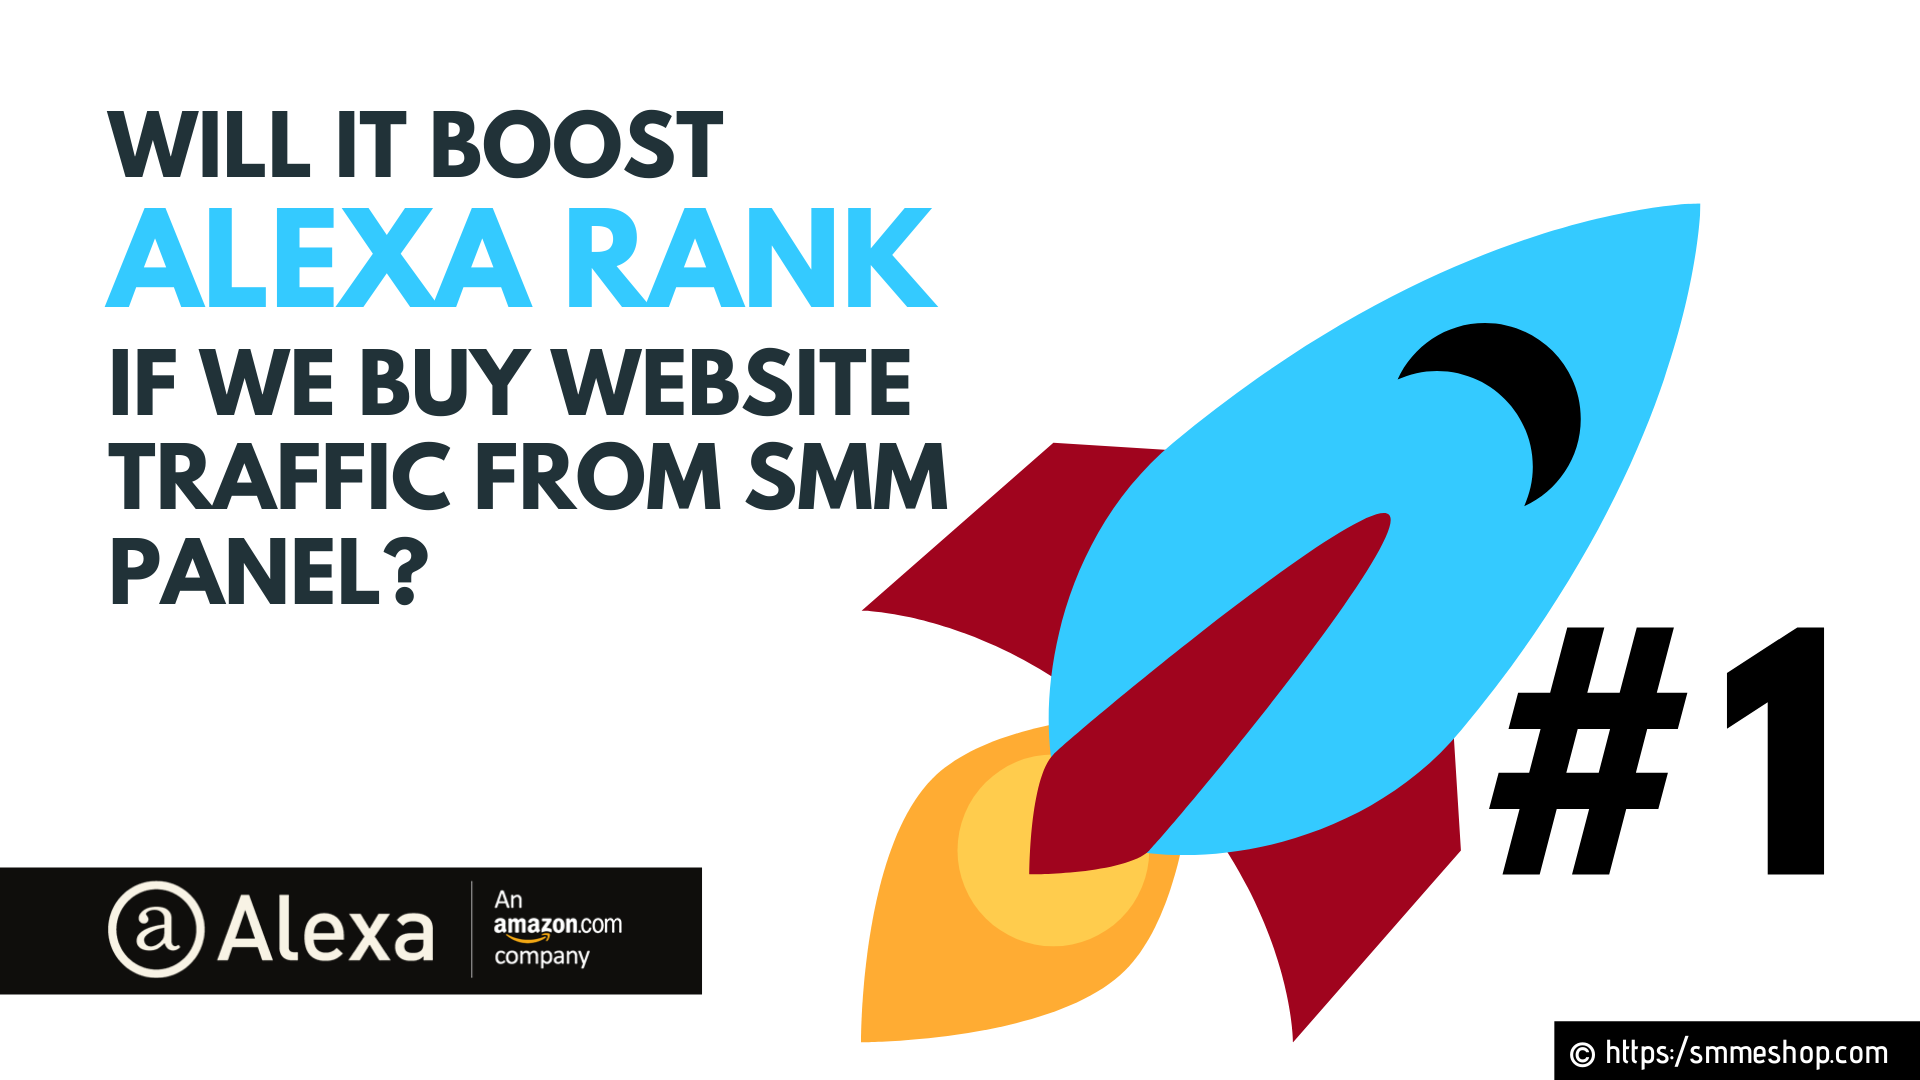 Does Alexa Rank Really Boost if We Buy Website Traffic? Let's Find Out!